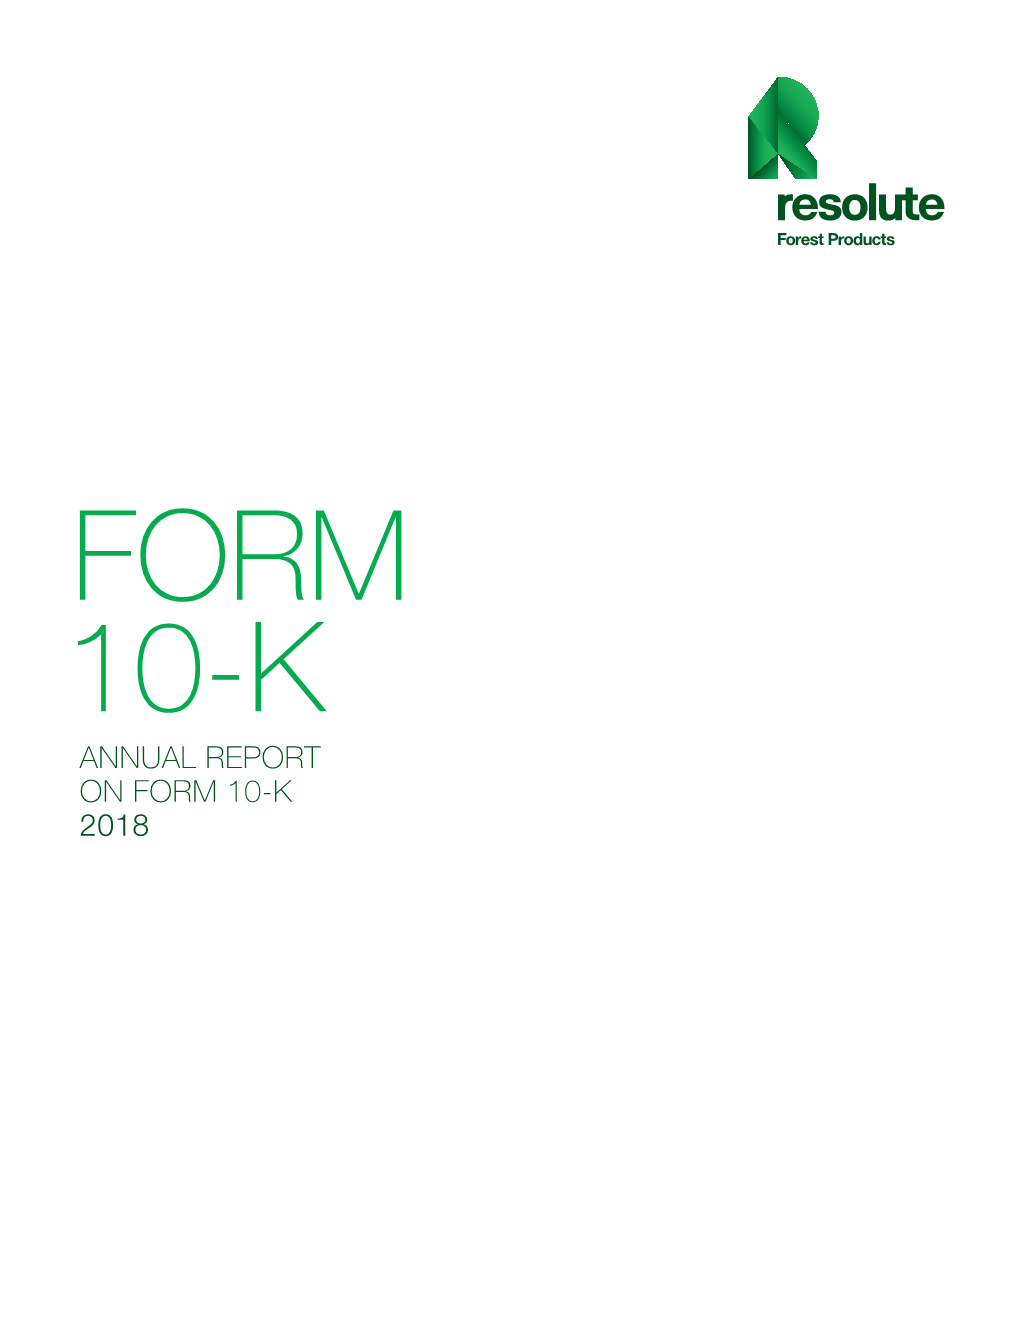 2018 Annual Report on Form 10-K